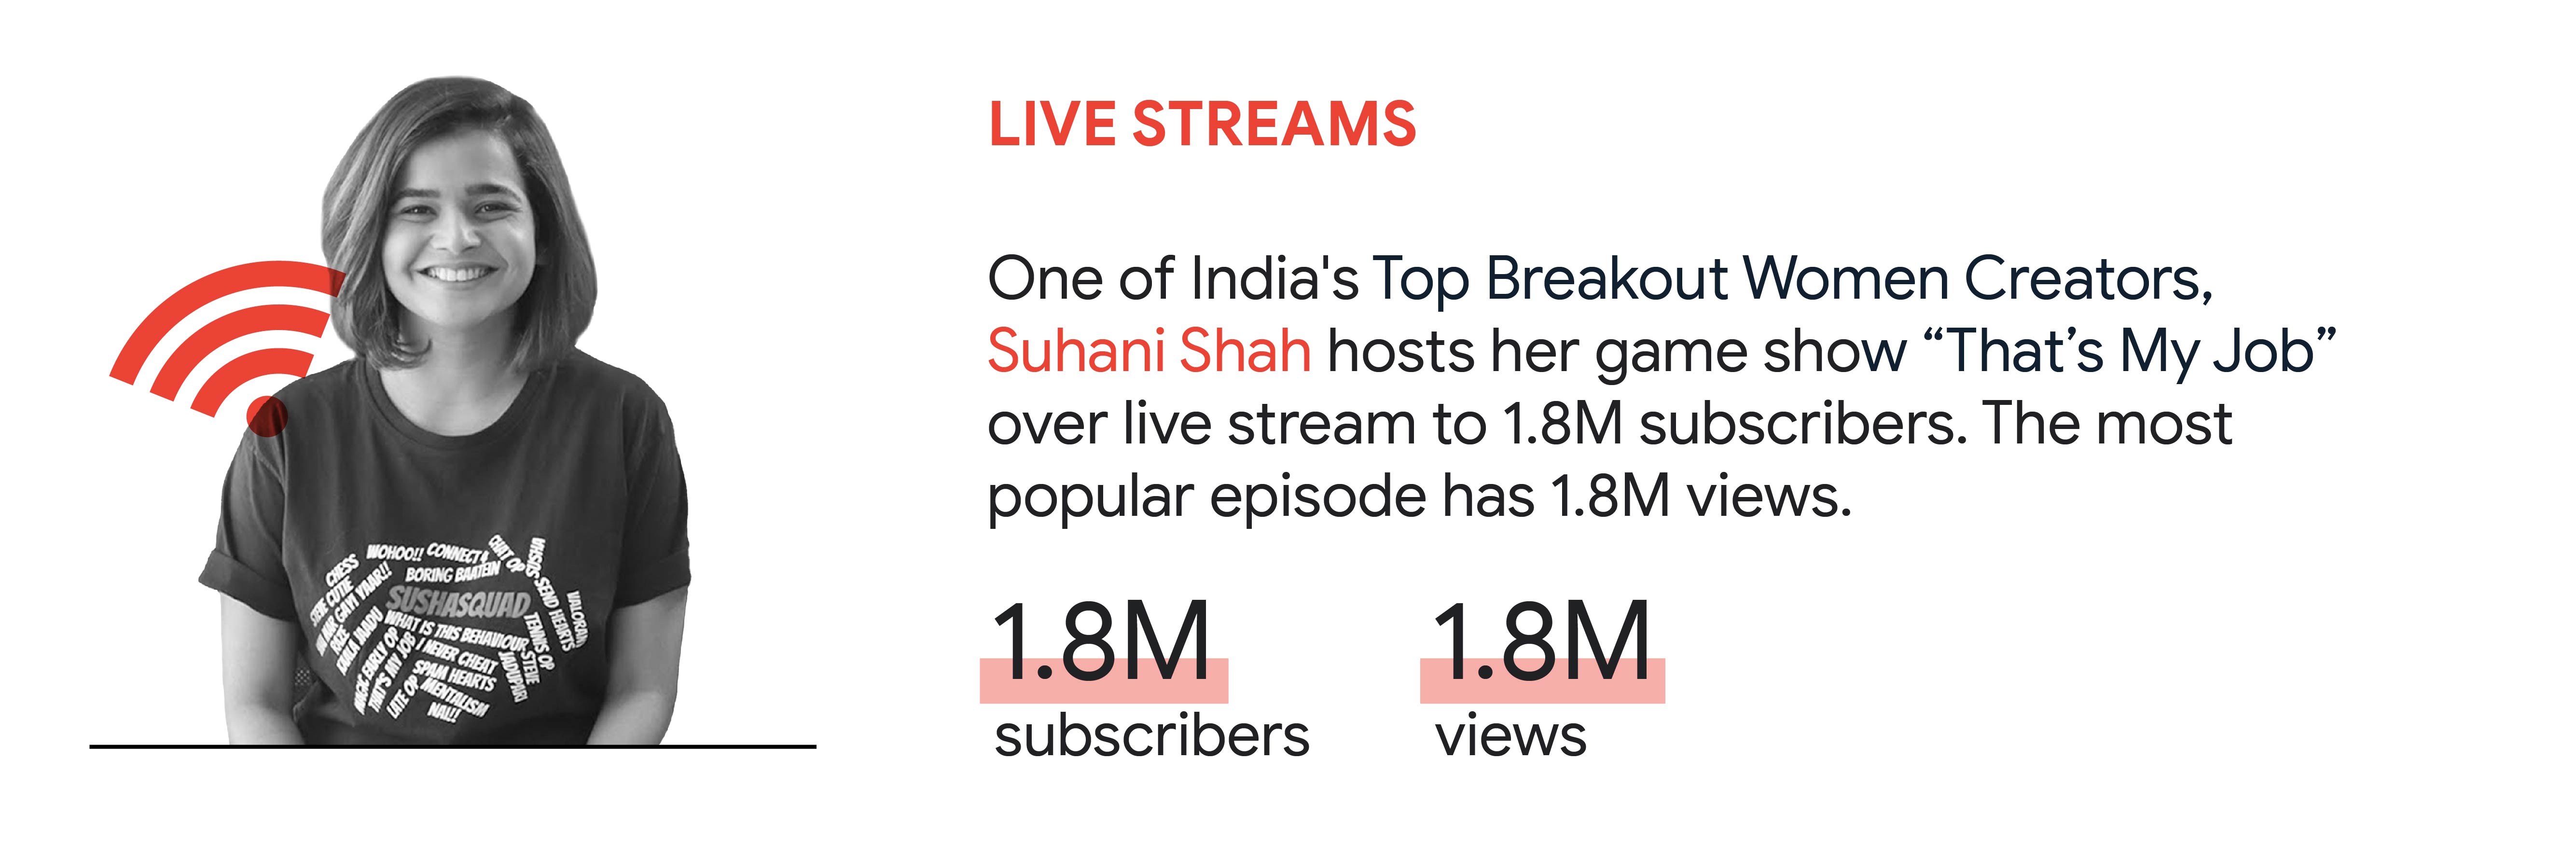 YouTube trend 2: Live streams. One of India’s Top Breakout Women Creators, Suhani Shah hosts her game show “That’s My Job” over live stream to 1.8M subscribers. The most popular episode has 1.8M views.